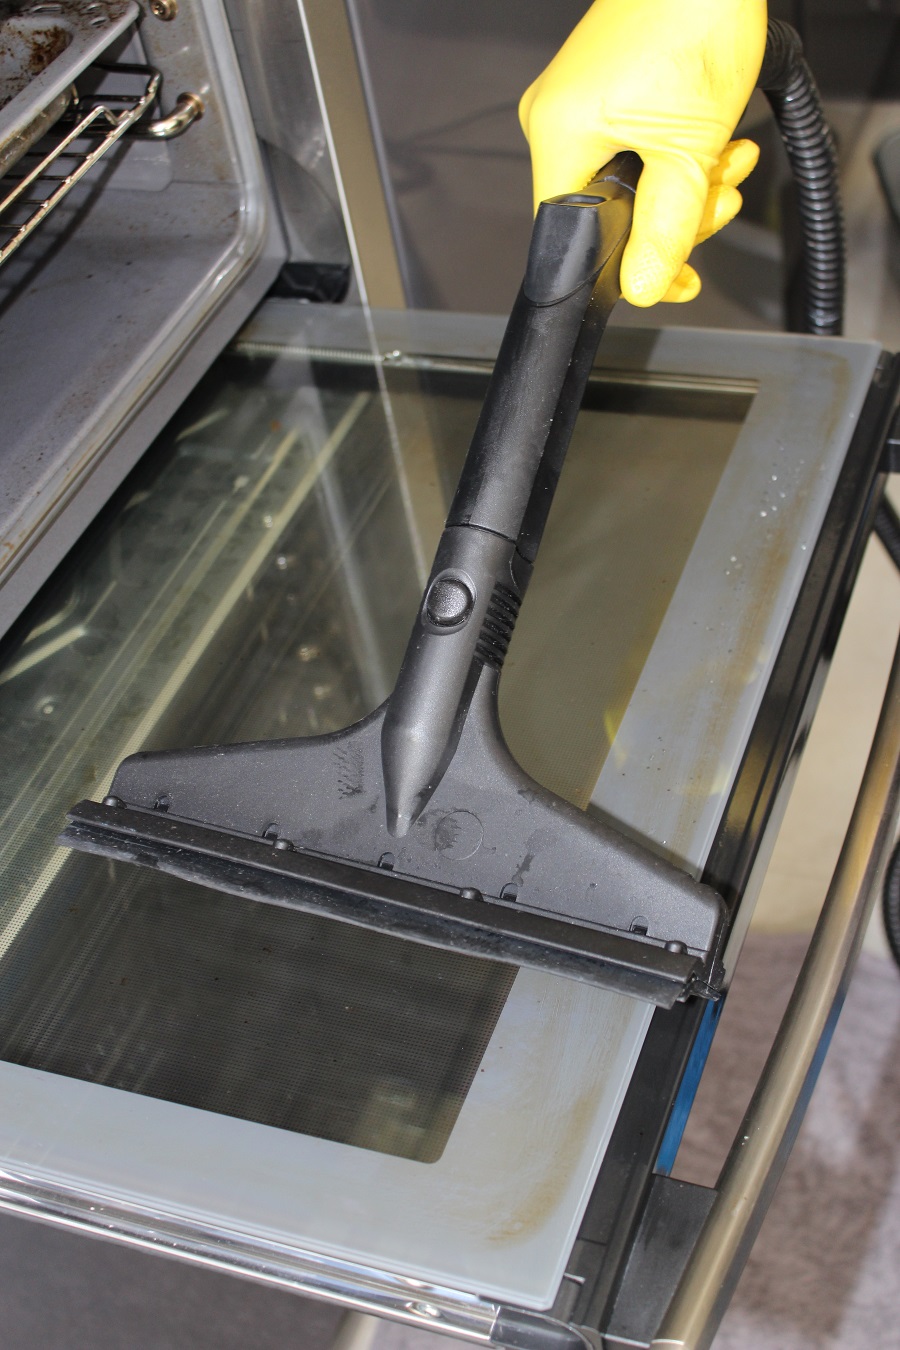 The processes that are applied during an Oven Cleaning service